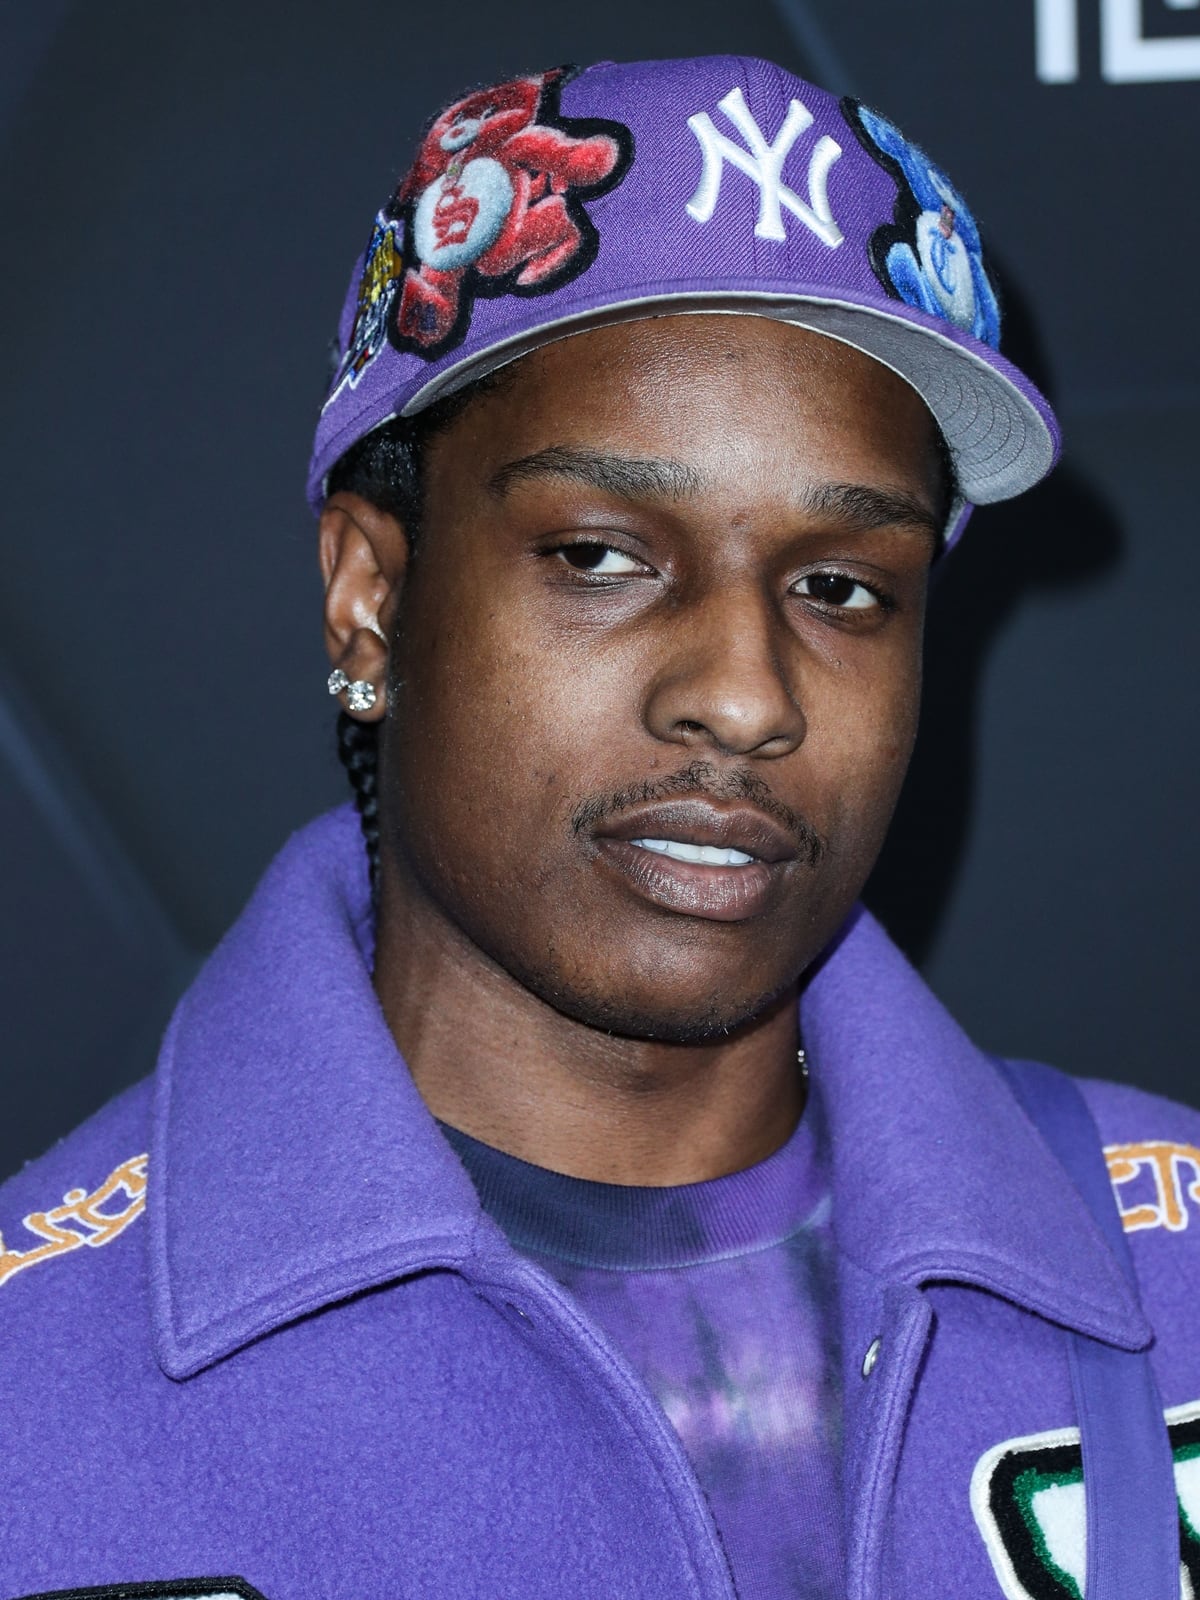 A$AP Rocky was arrested for assault with a deadly weapon on April 20, 2022, at LAX Airport in Los Angeles